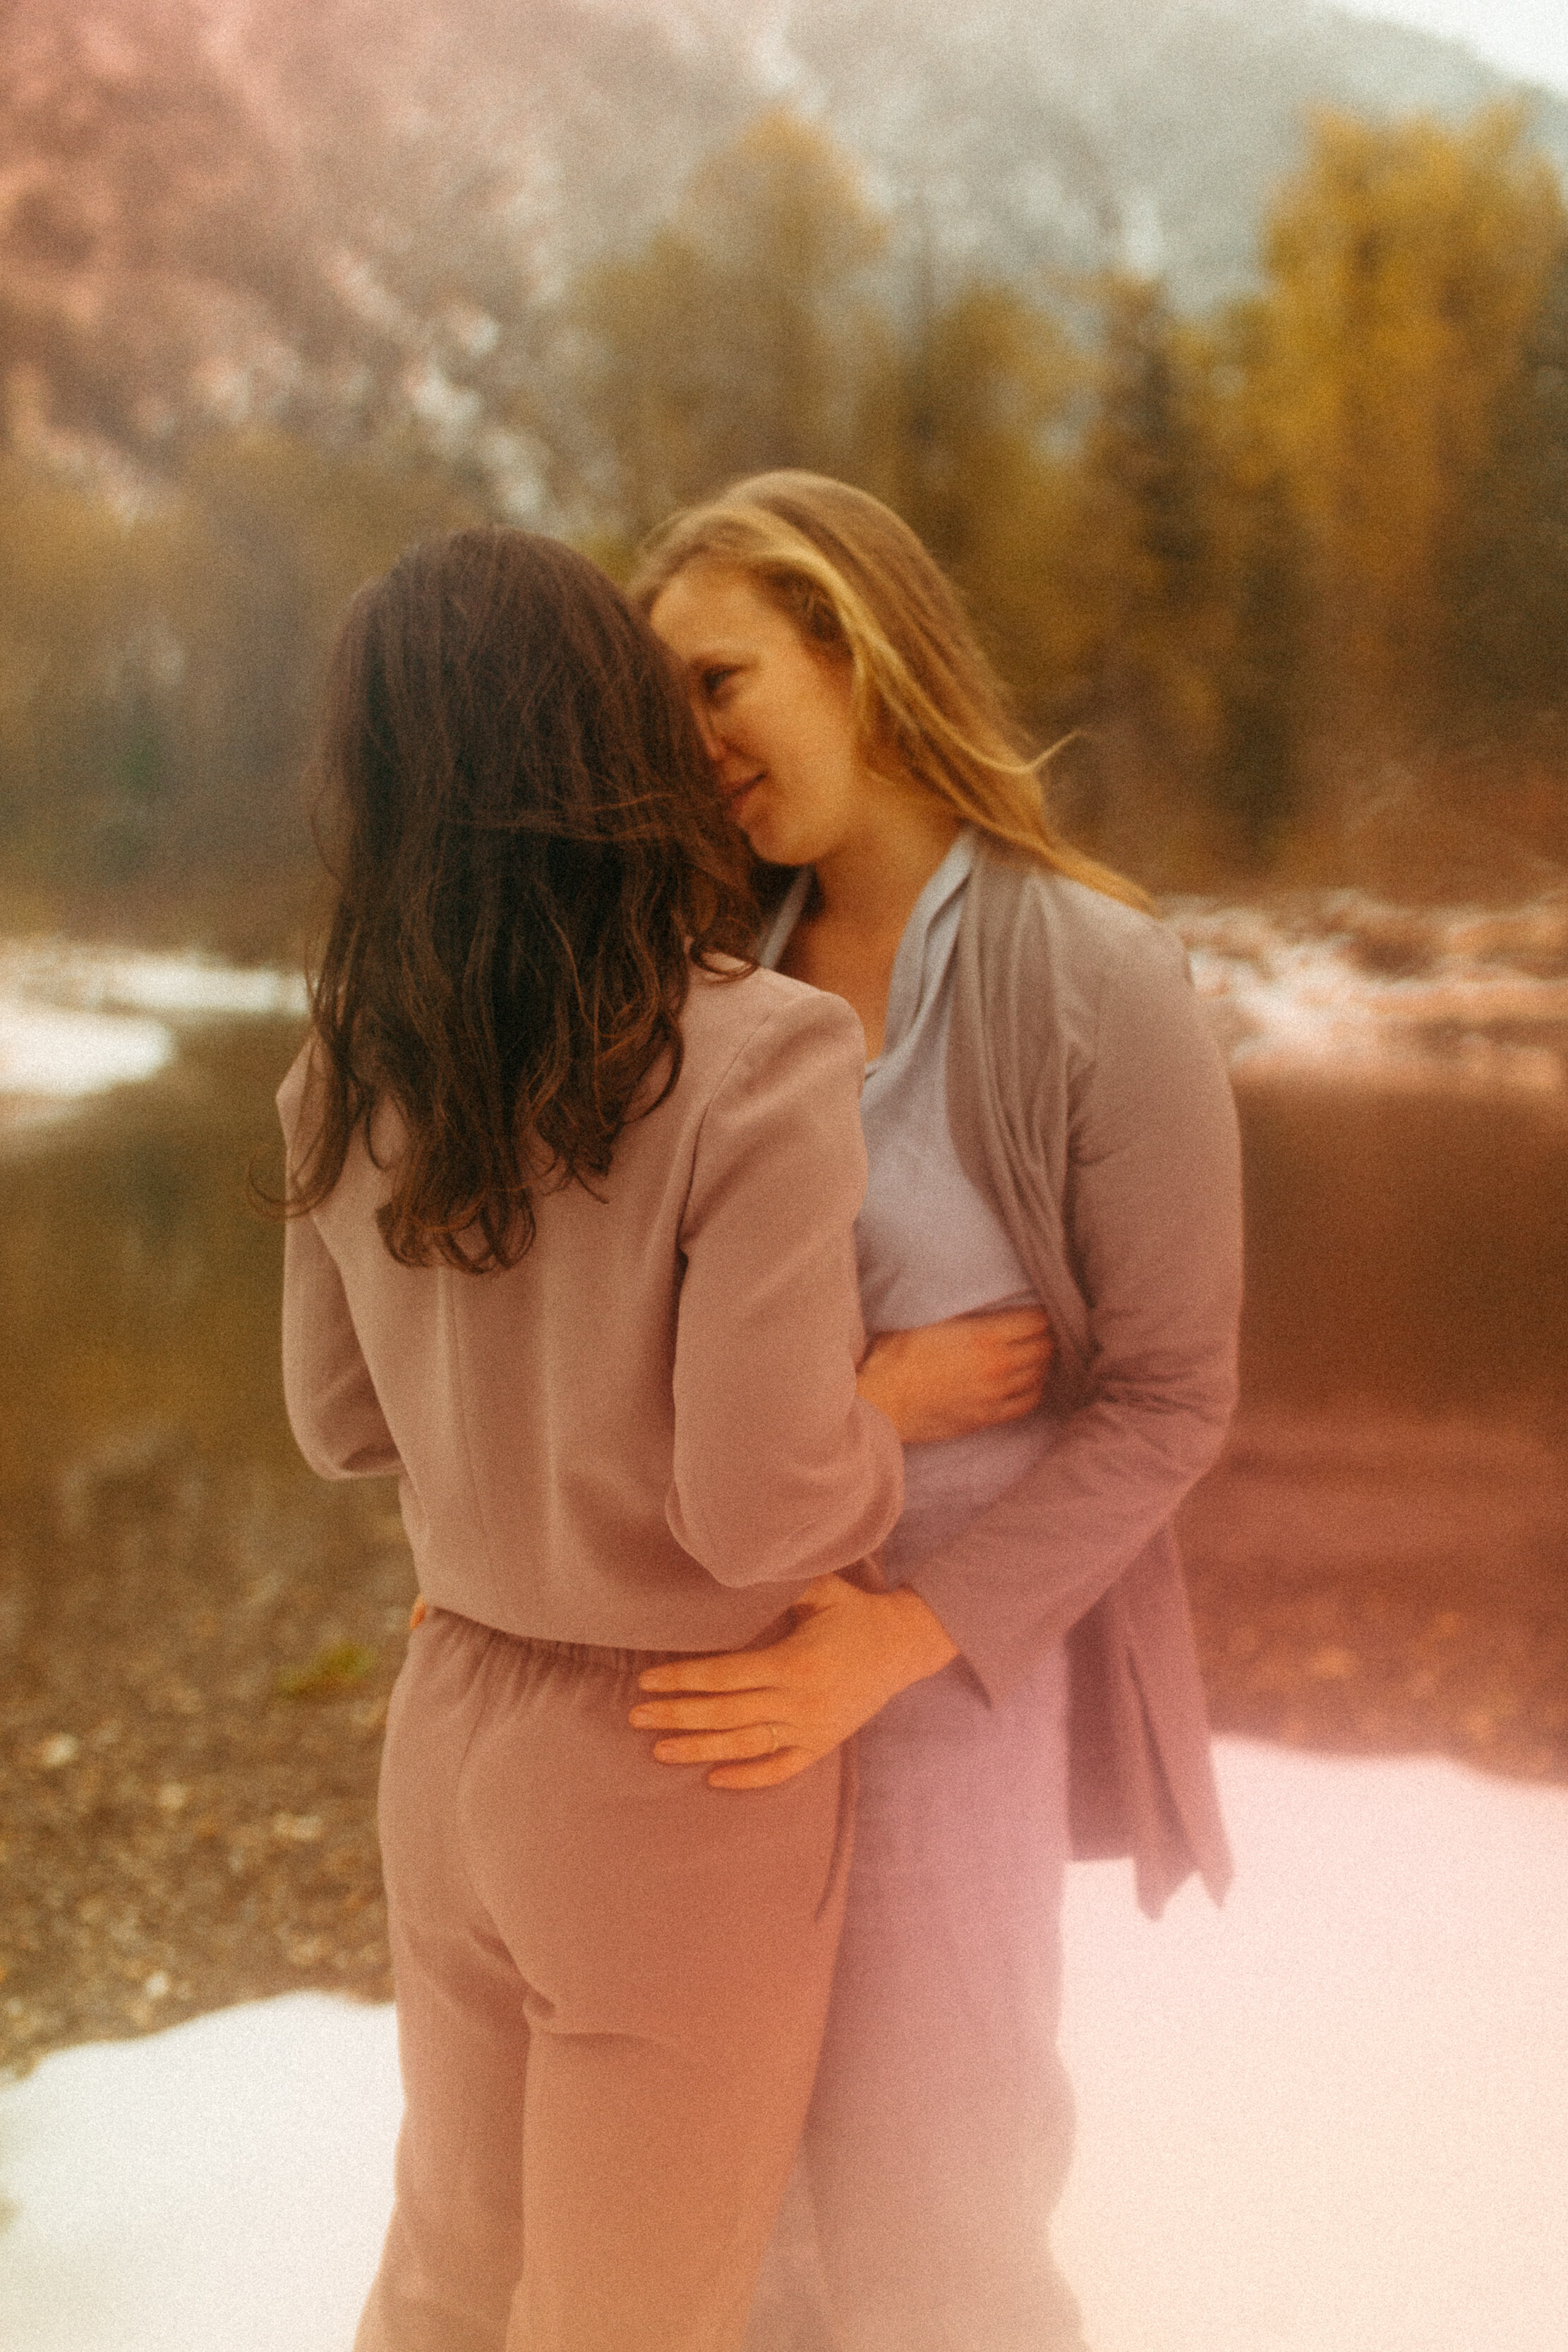 queer-gay-lesbian-trans-affirming-lgbtq-adventure-elopement-intimate-wedding-photographer-pnw-pacific-northwest-pnw-mountain-stream-forest-cowgay-tacoma-seattle-washington-portland-oregon-halle-roland-photography-non-binary-analog-film-artist-165-107.jpg